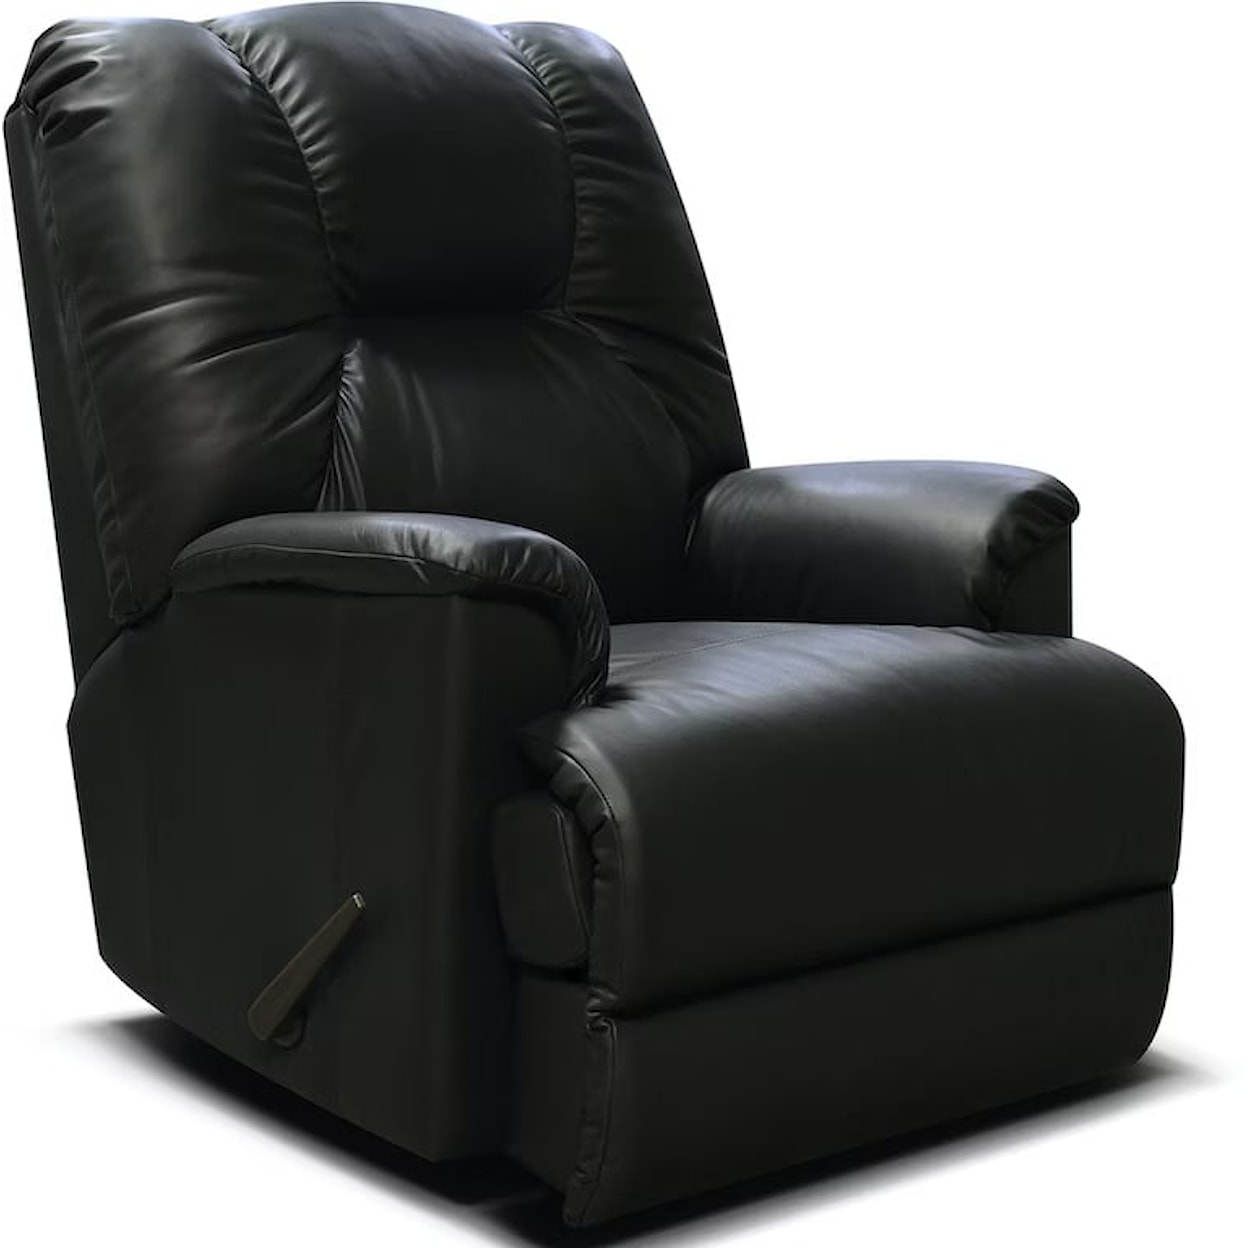 Tennessee Custom Upholstery EZ5W00 Series Leather Swivel Gliding Recliner